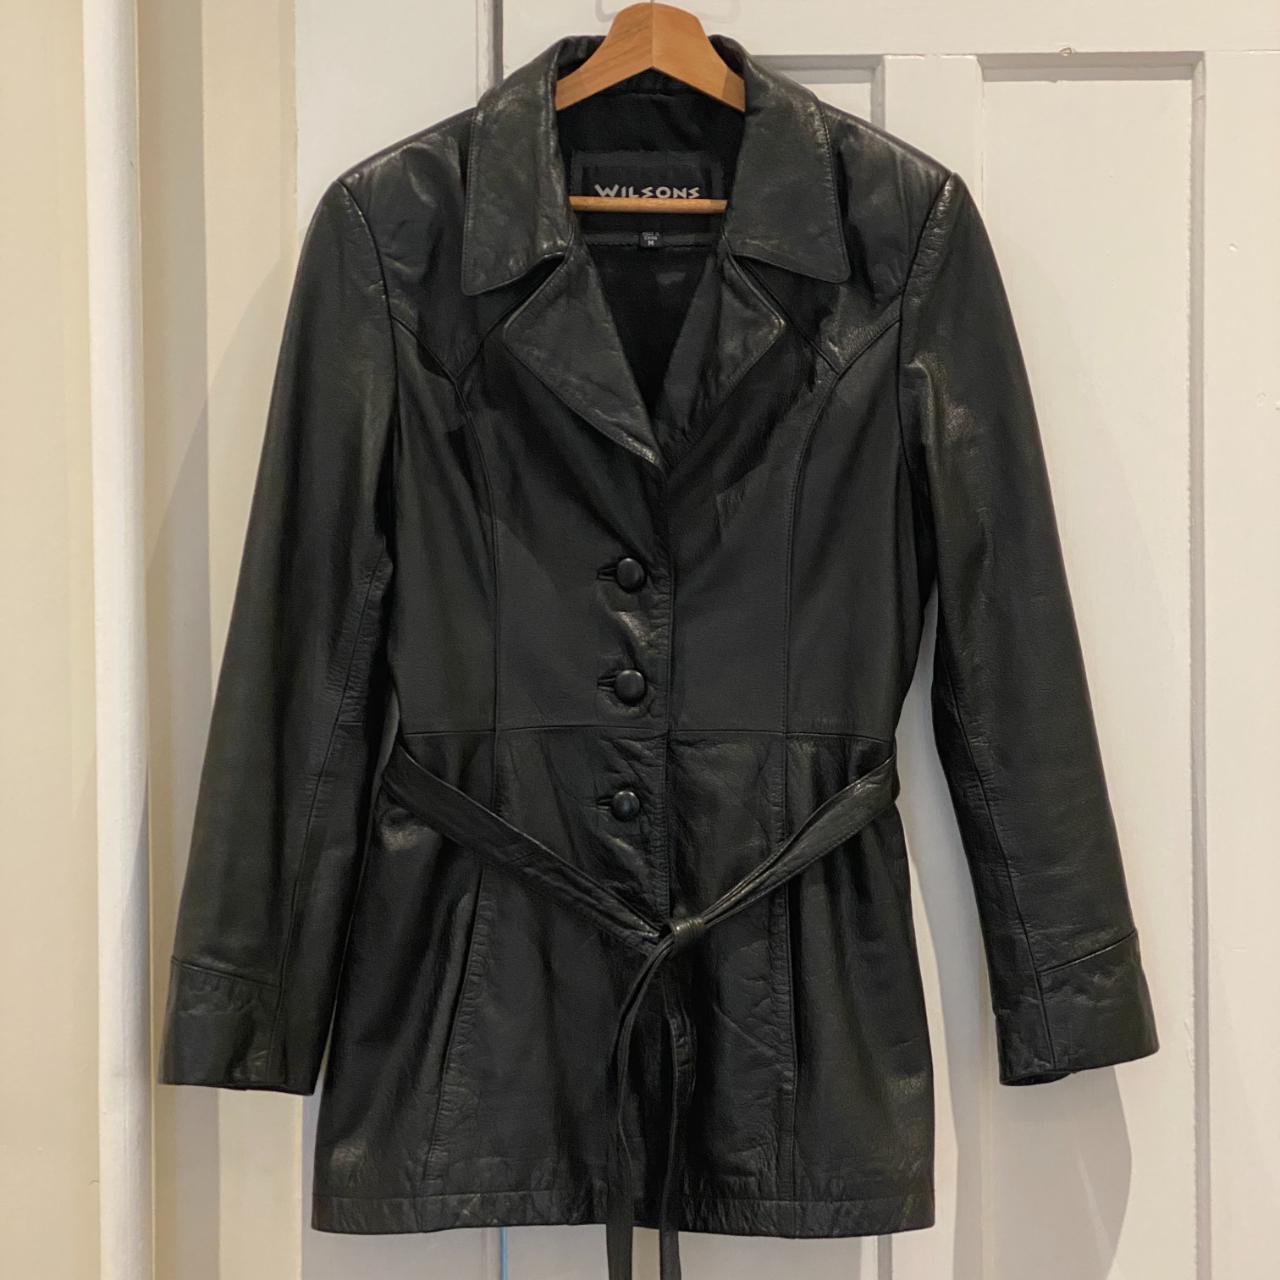 Vintage WILSONS Leather Jacket - Great condition!... - Depop